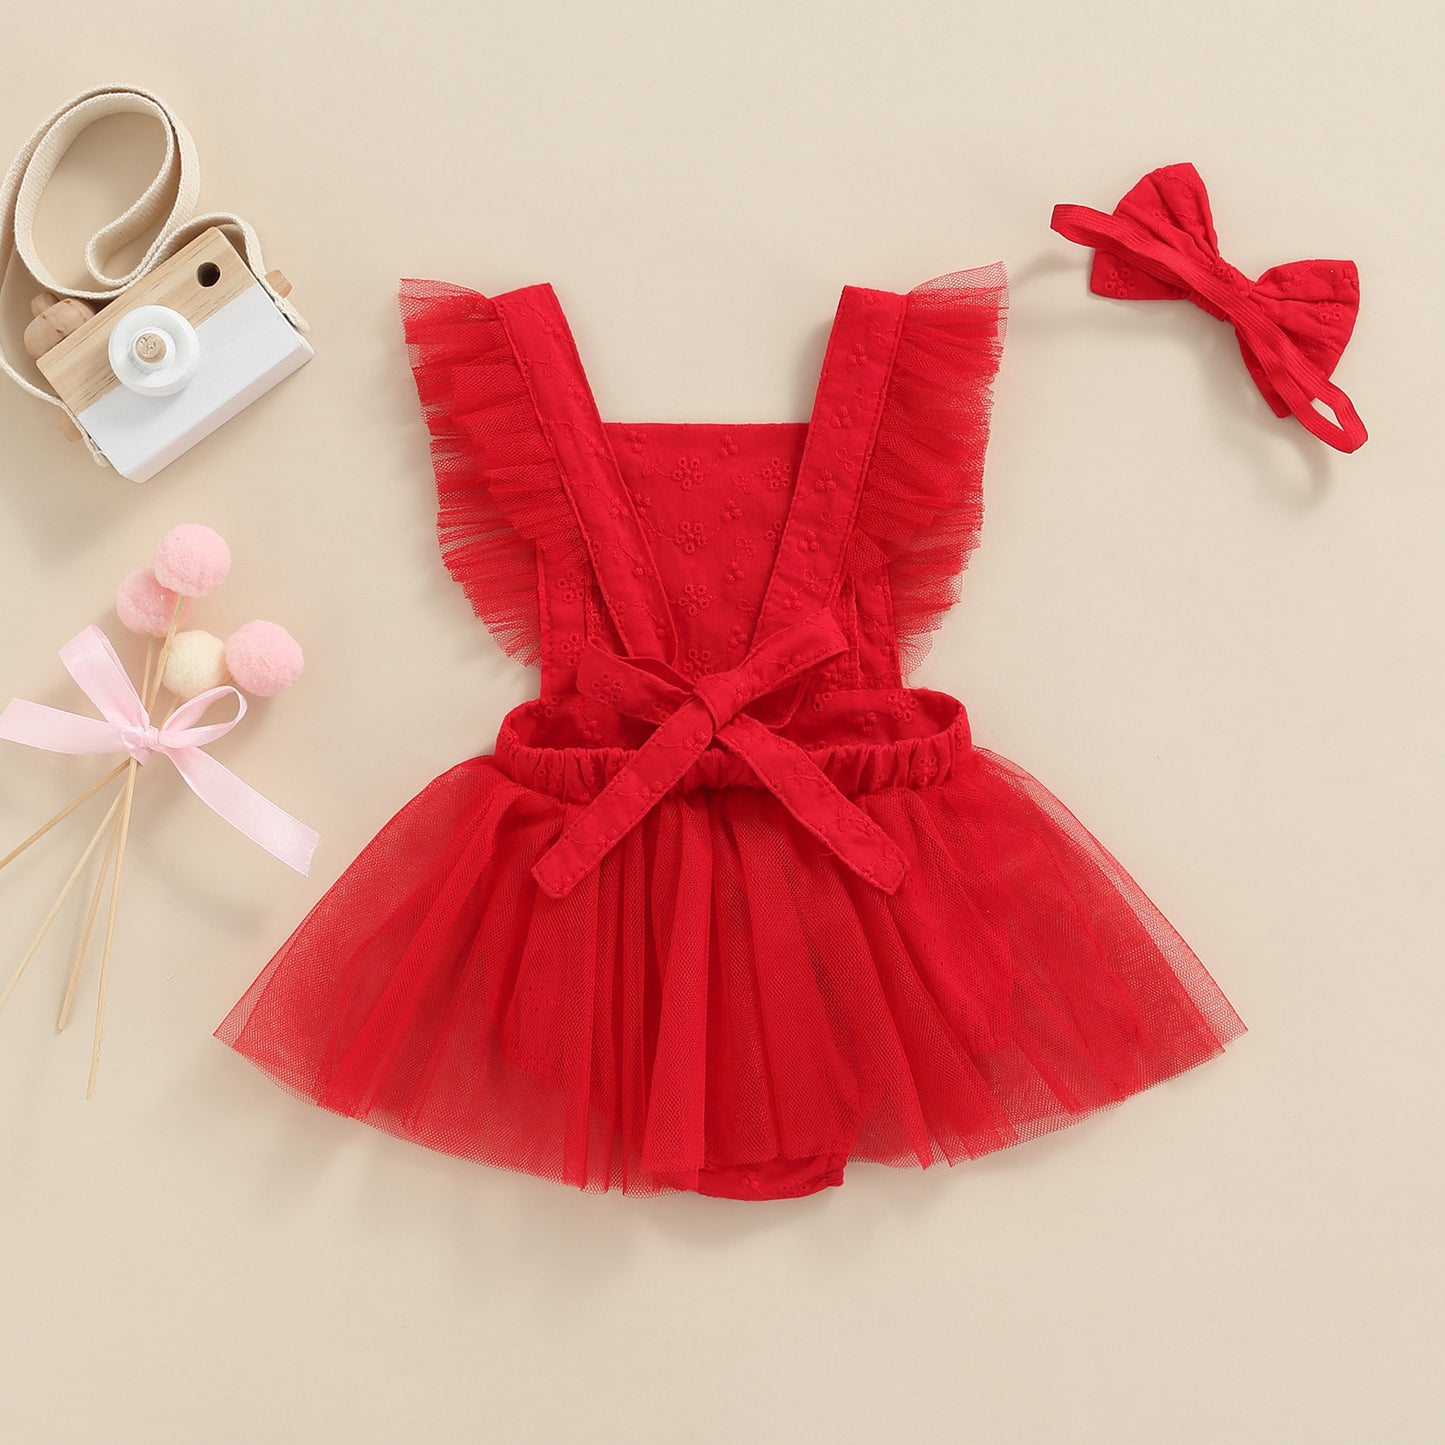 Red Lace Baby Romper